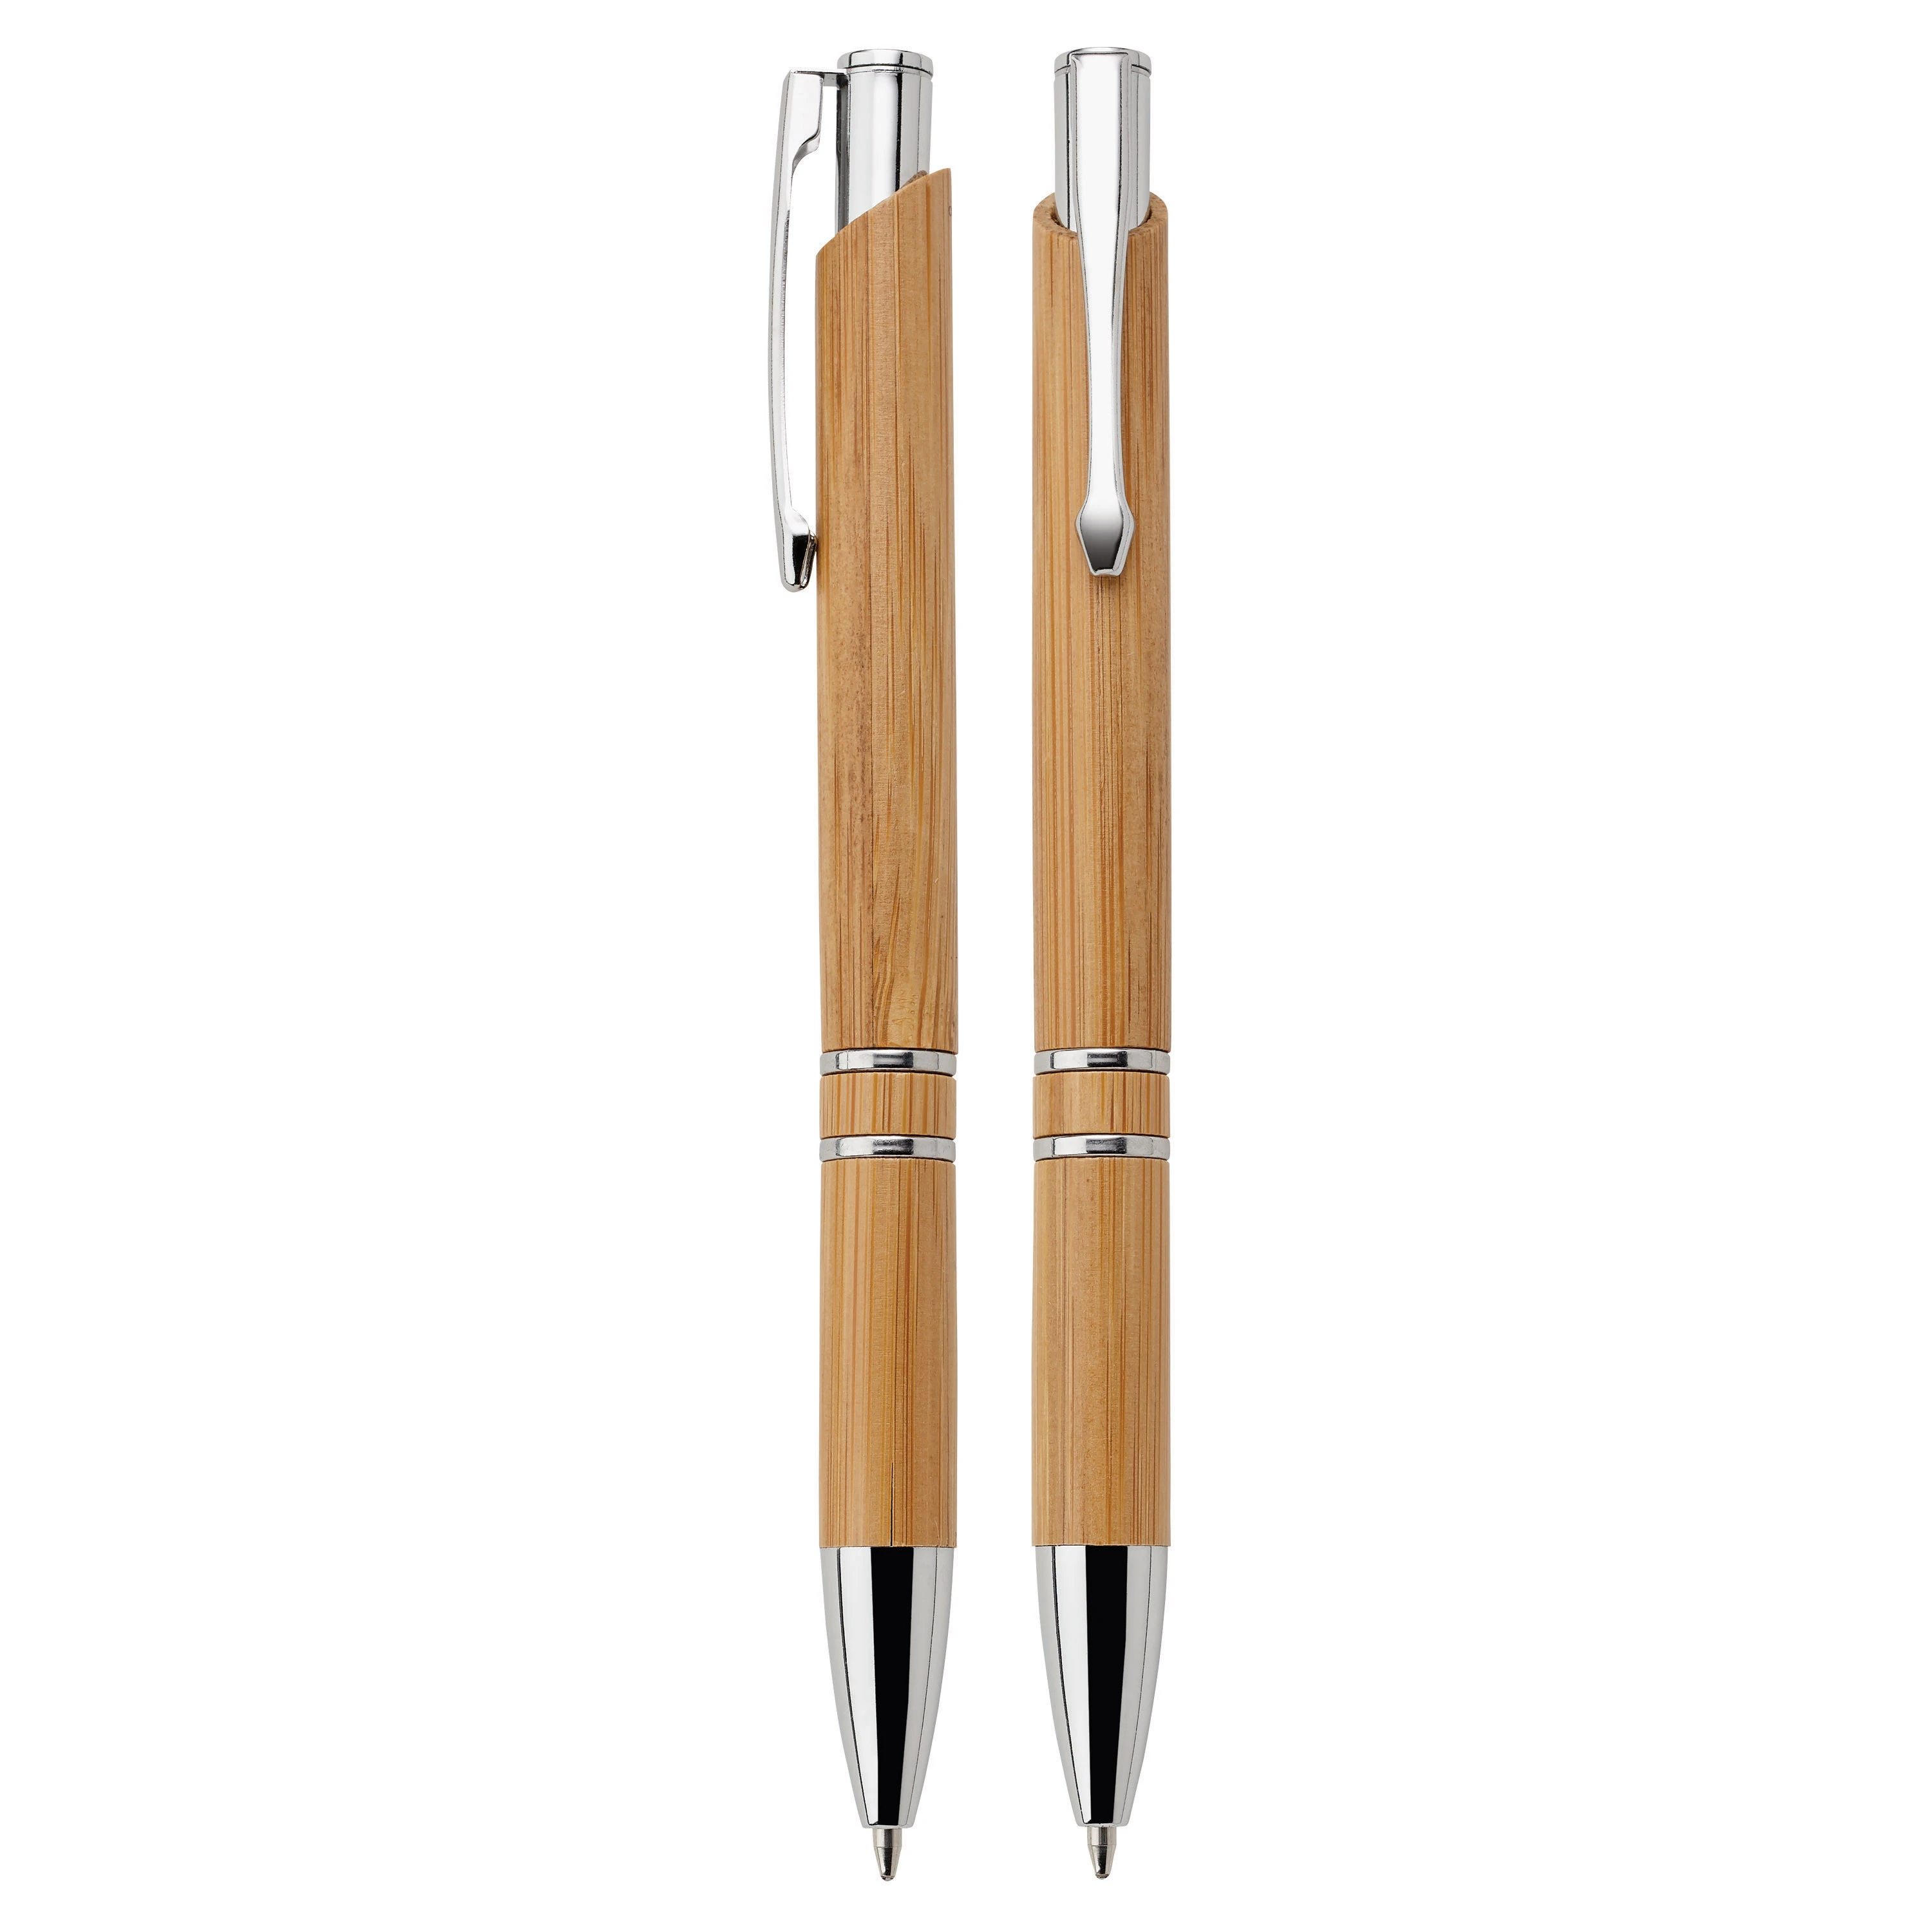 Eco Green bamboo wood promo ball Pen products item, 2 rings Recycle Bamboo ball-point pen with laser engraved logo Ball Pens